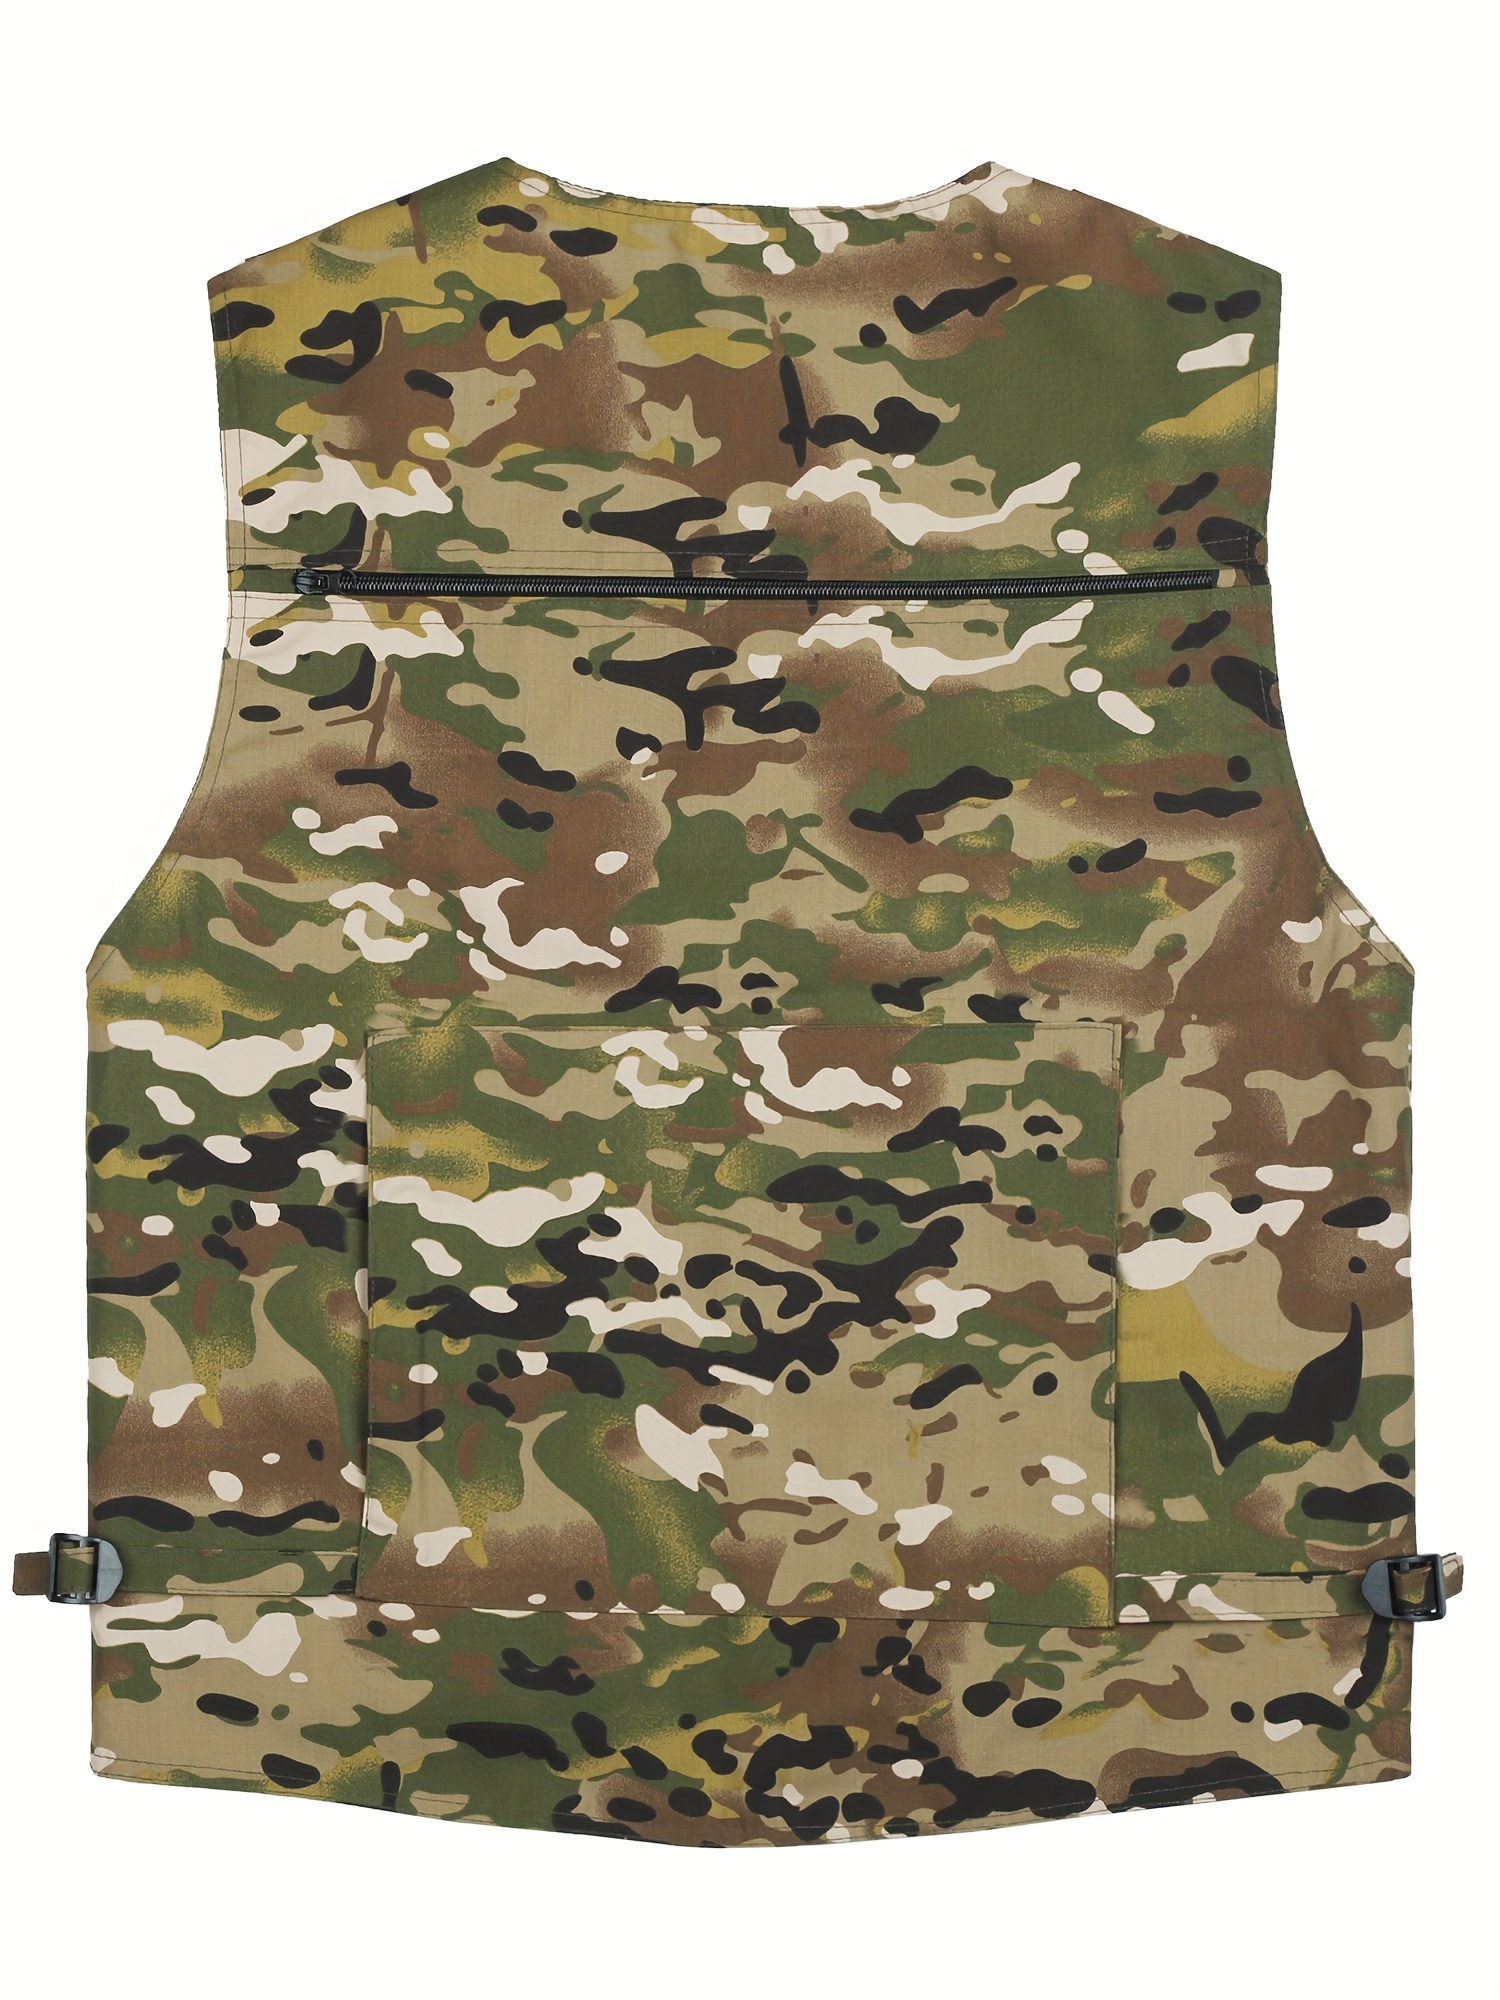 New Men Camouflage Military Vest Outdoor Summer Tactical Fishing